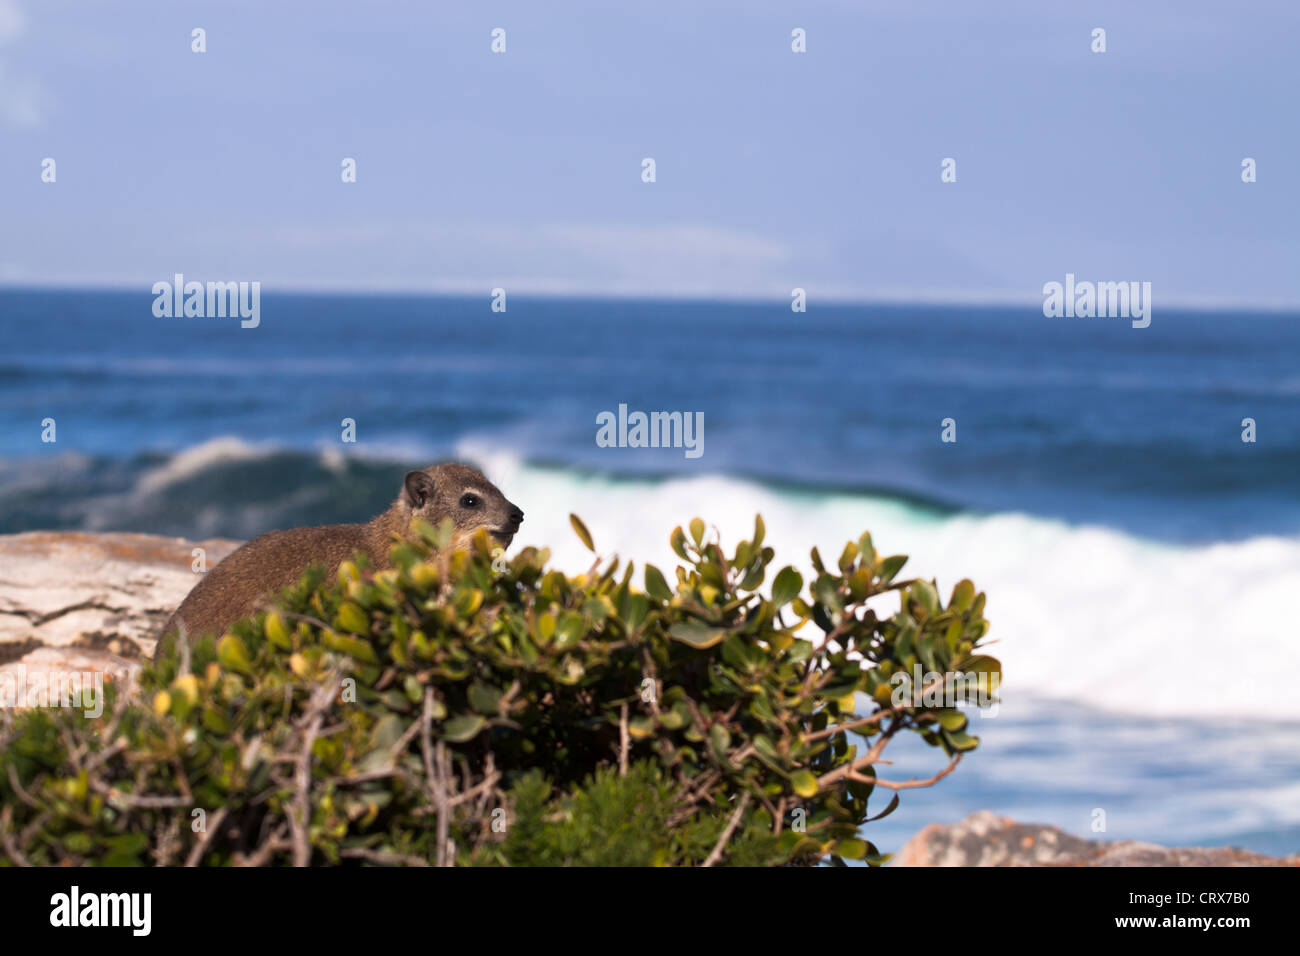 Rock hyrax or dassie sitting on rocks at the coastline, with the waves visible in the background Stock Photo